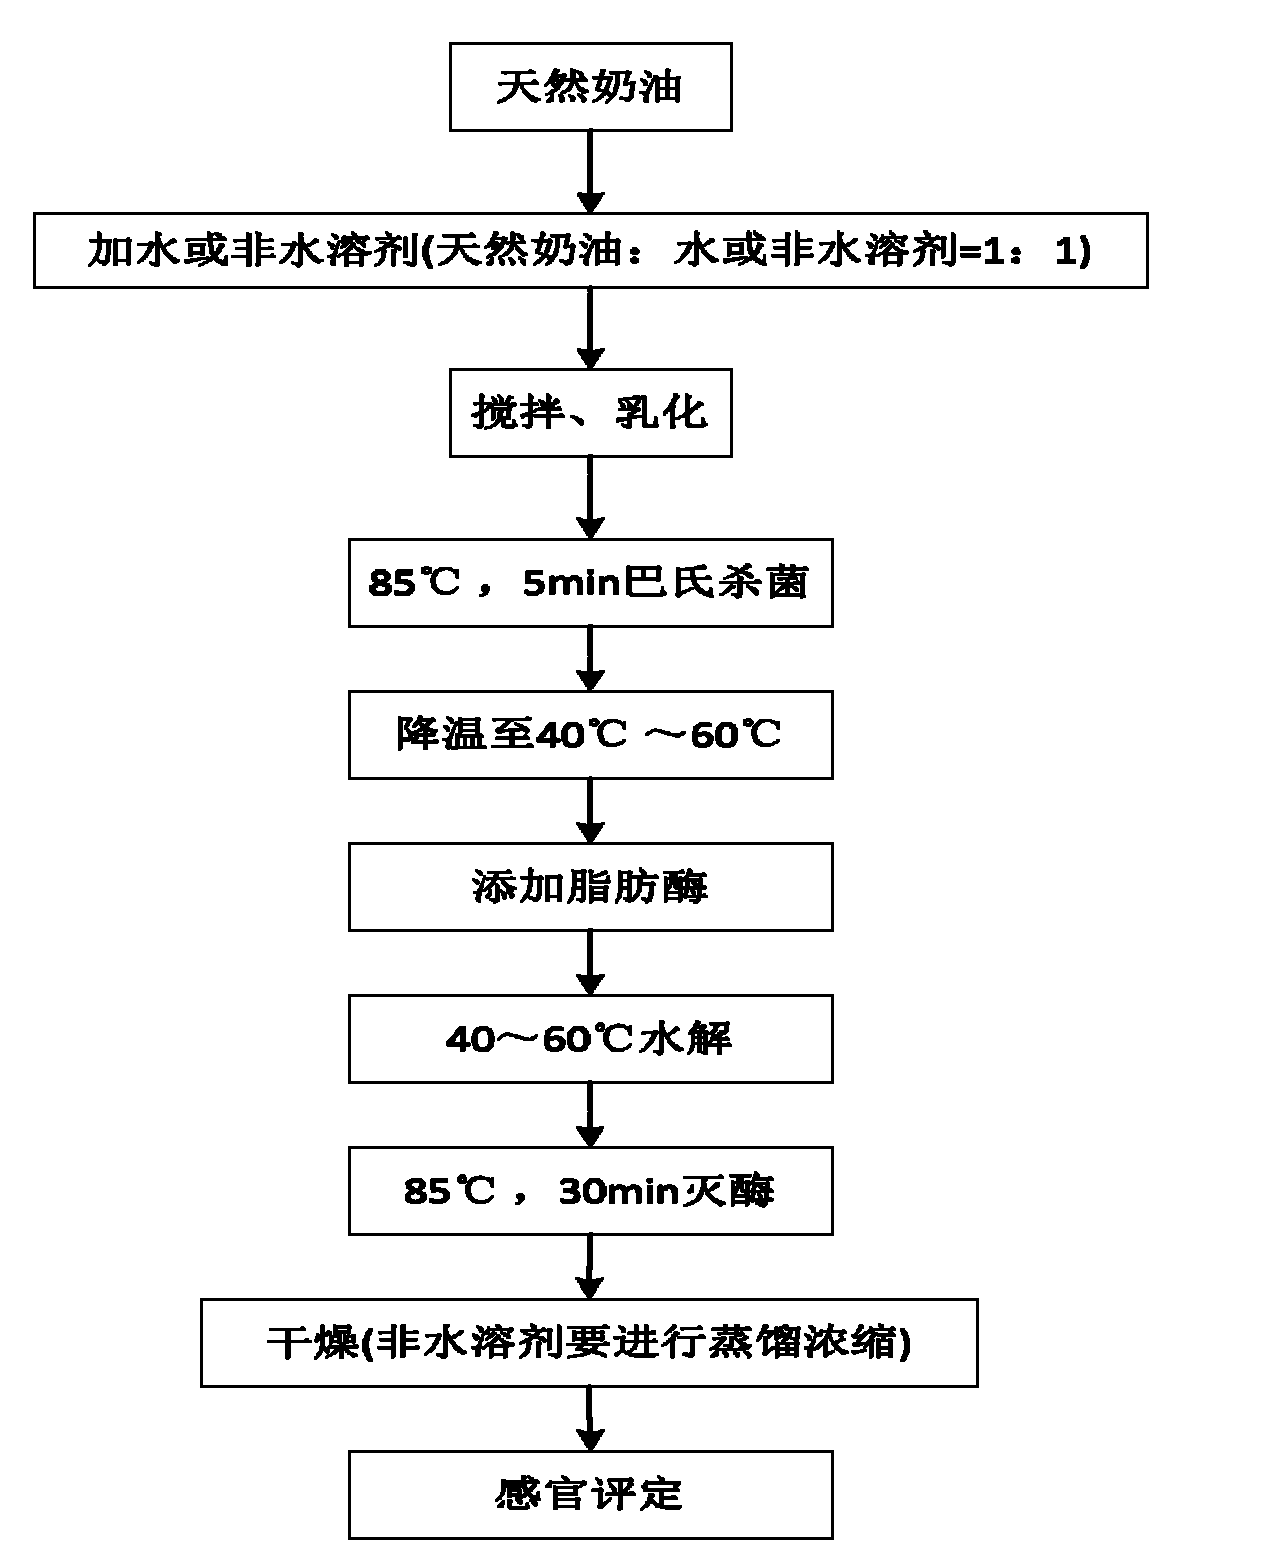 Method for preparing milk flavor essence, prepared milk flavor essence thereof and related feed flavoring agent